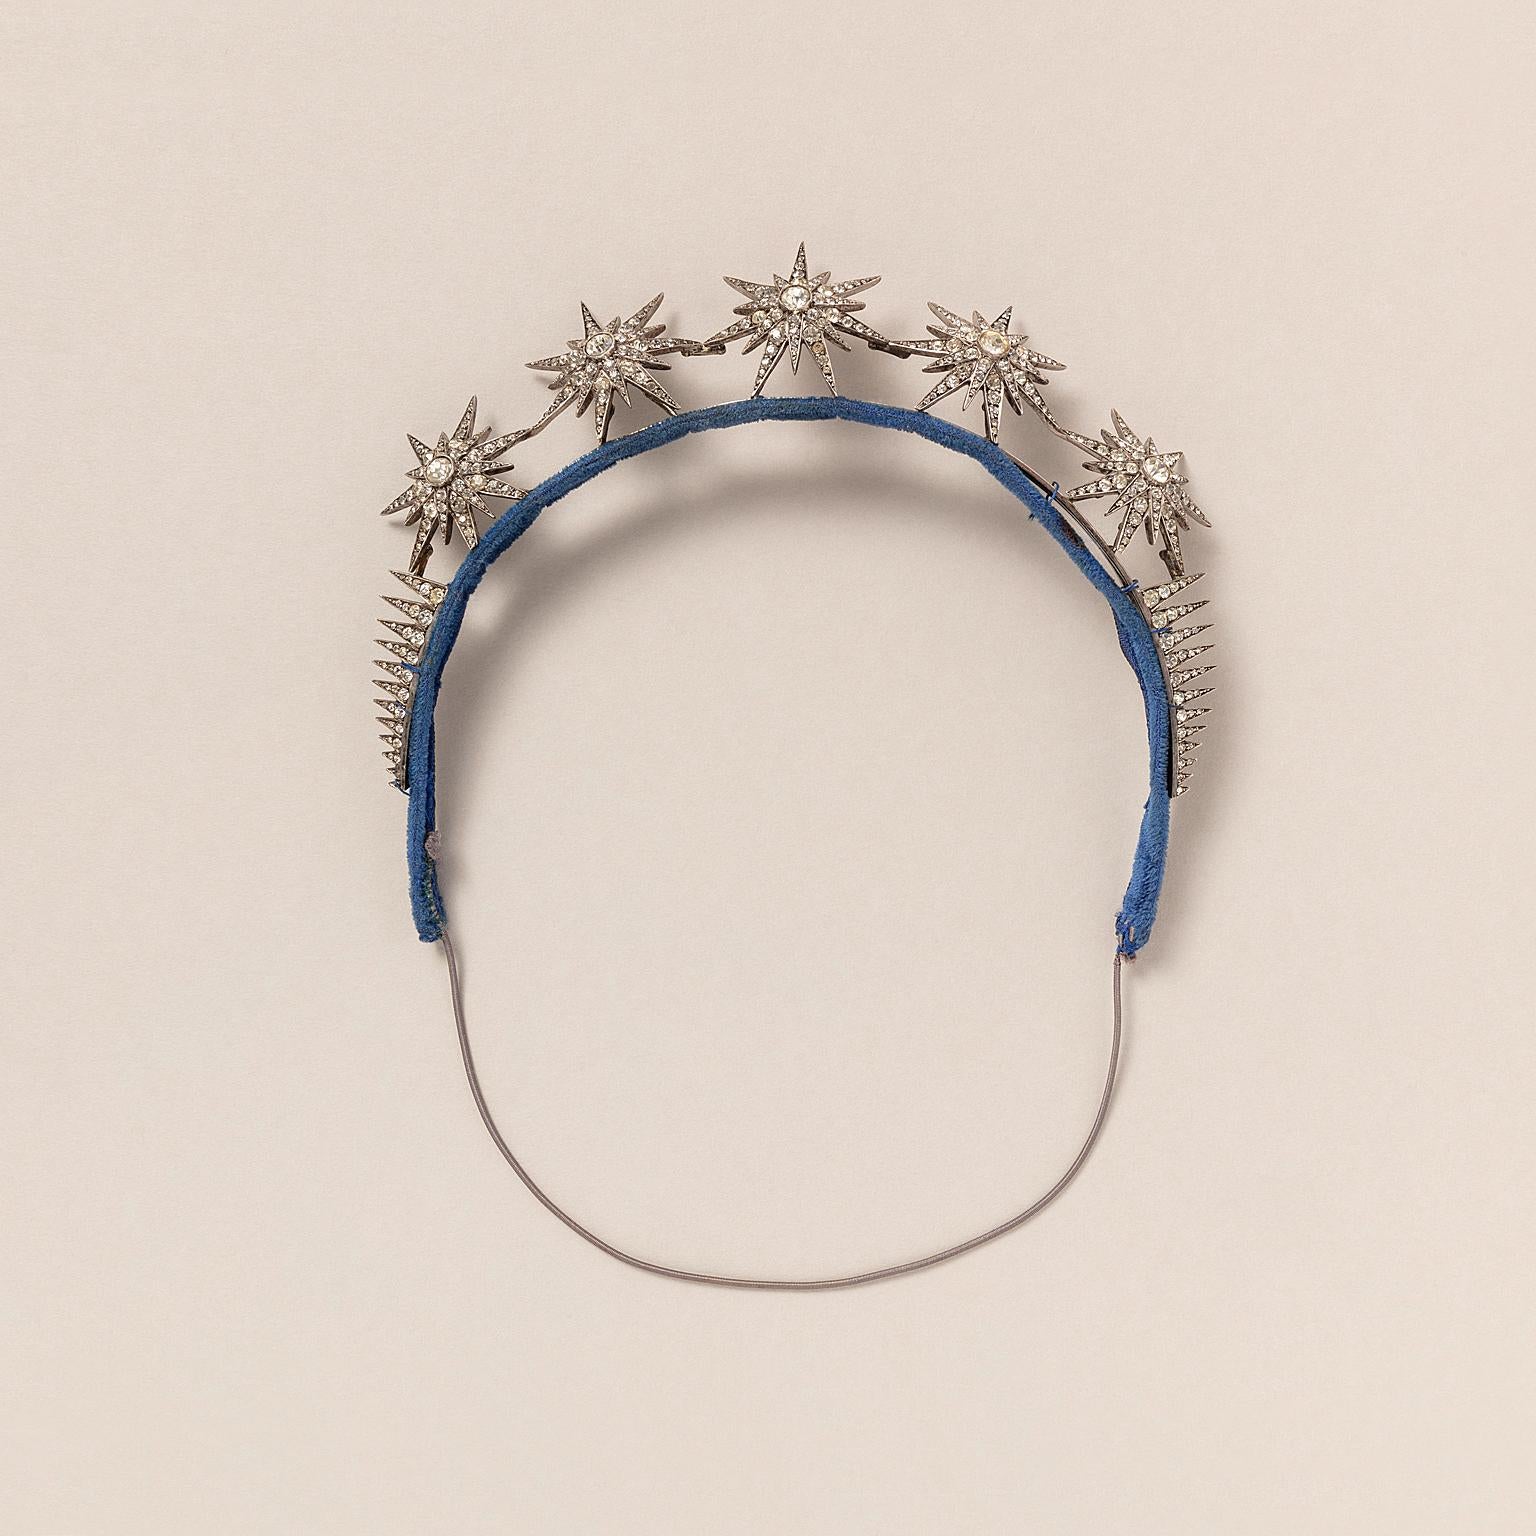 A tiara with five paste stars set on a a metal headband, inligned with blue velvet. On both sides are twelve radiating combs, descending in size. Provenance: The Late Lady Chalfont, of The Granary, Dean Manor Chipping Norton, Oxfordshire, England,